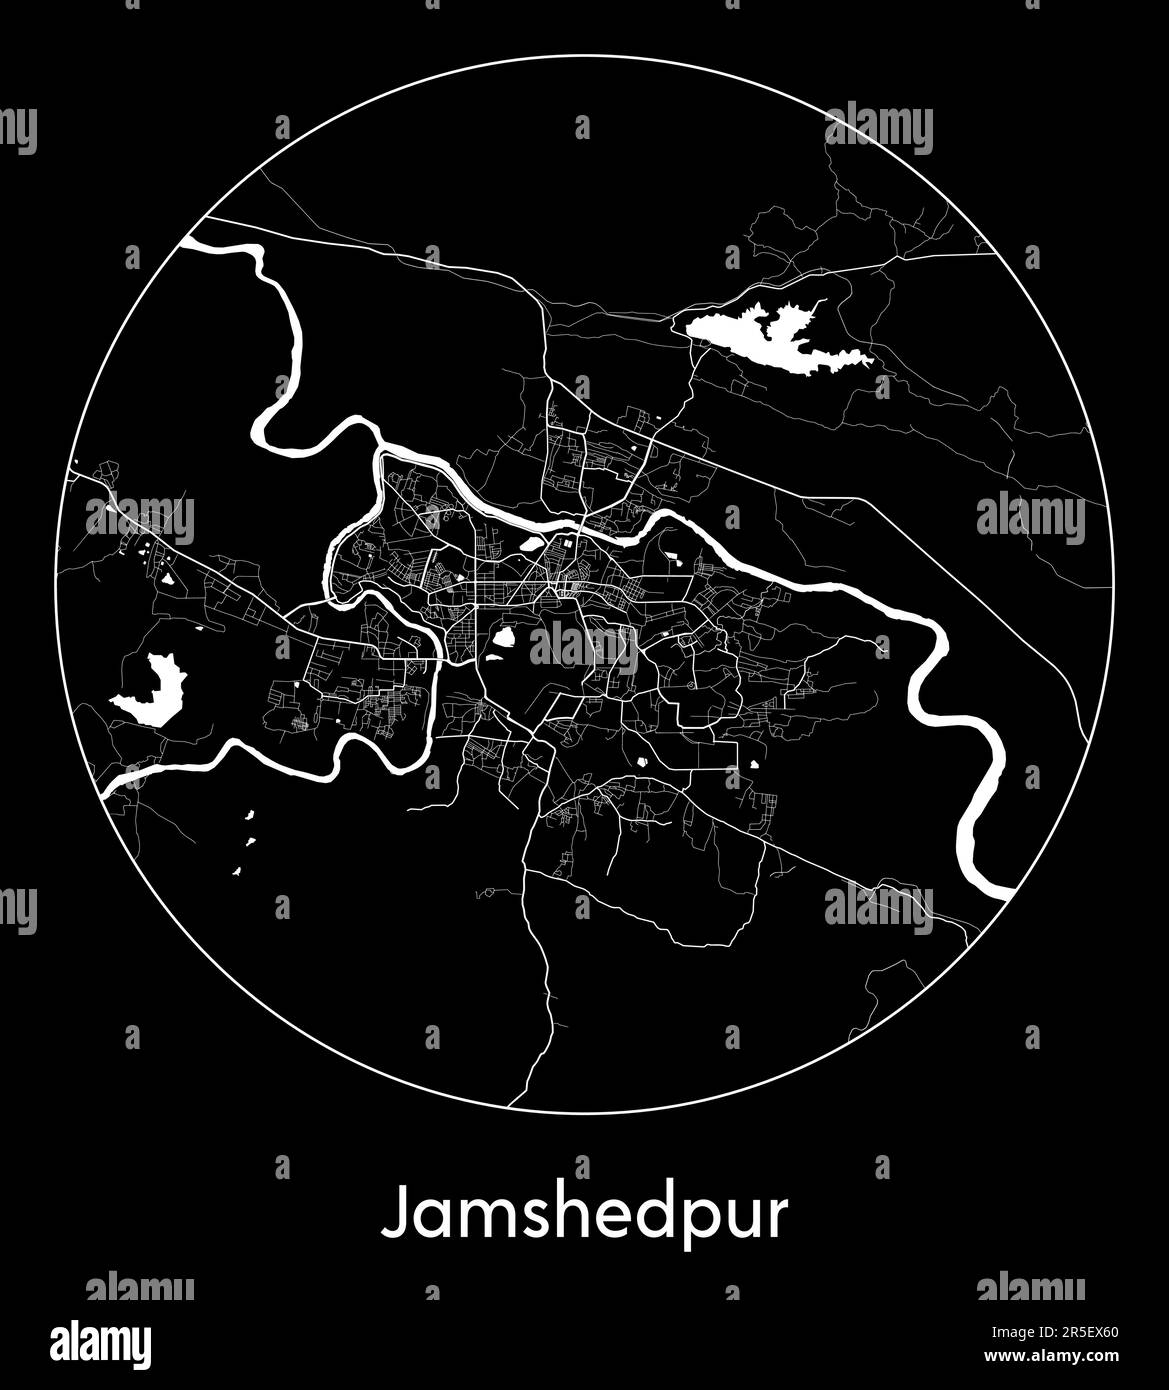 City Map Jamshedpur India Asia vector illustration Stock Vector